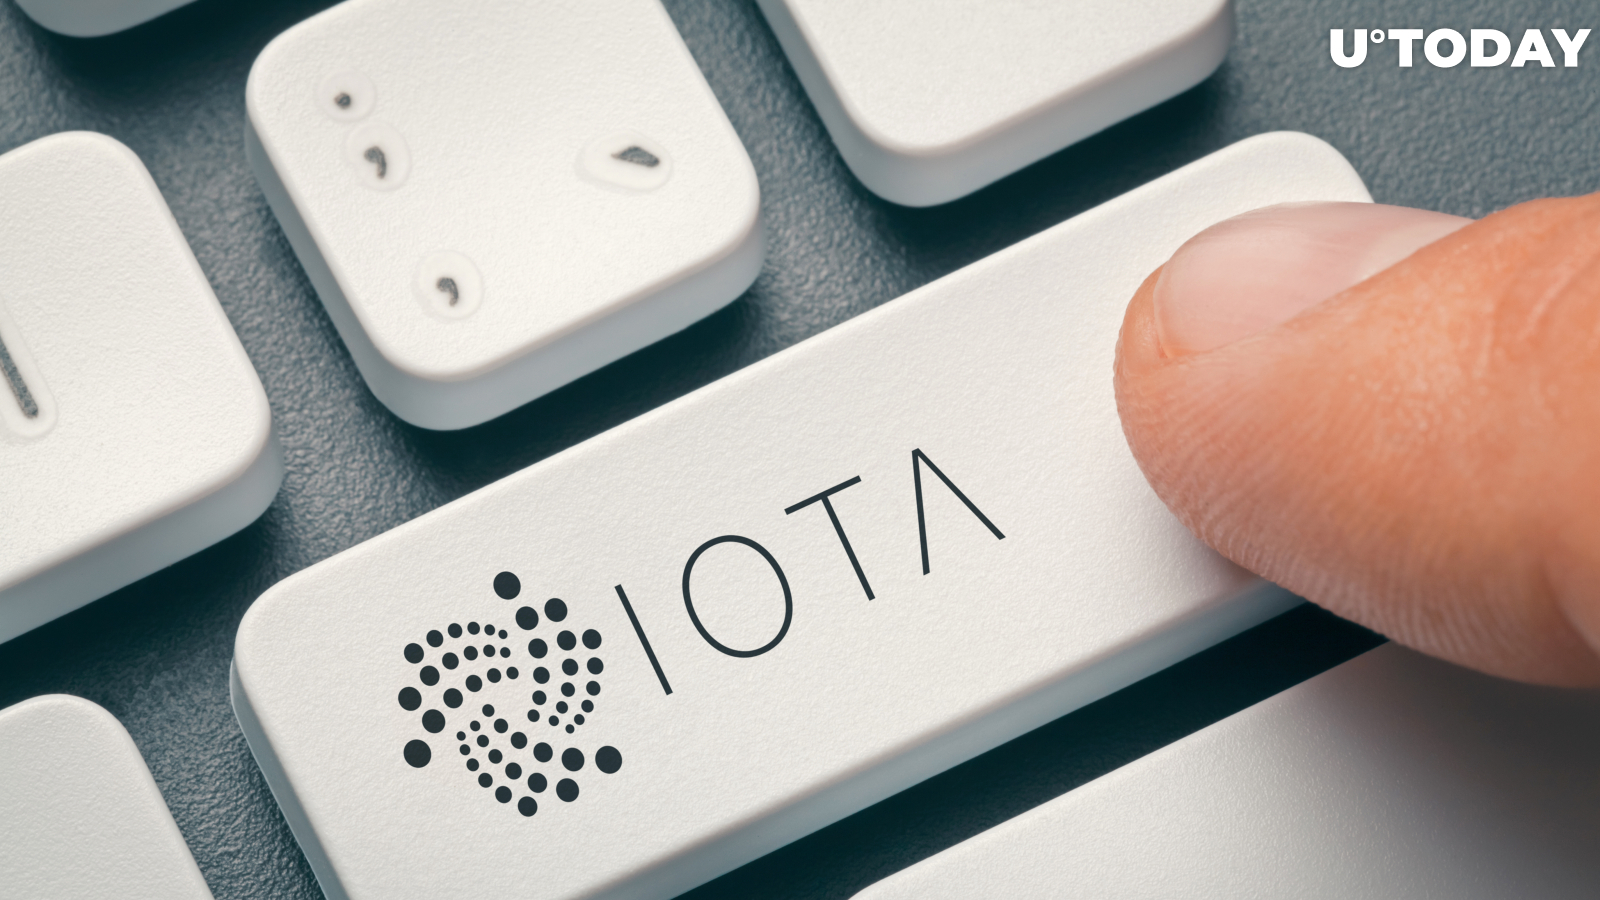 IOTA Implements "Post-Quantum" Upgrade, Dominik Schiener Teases "Exciting Times To Come"